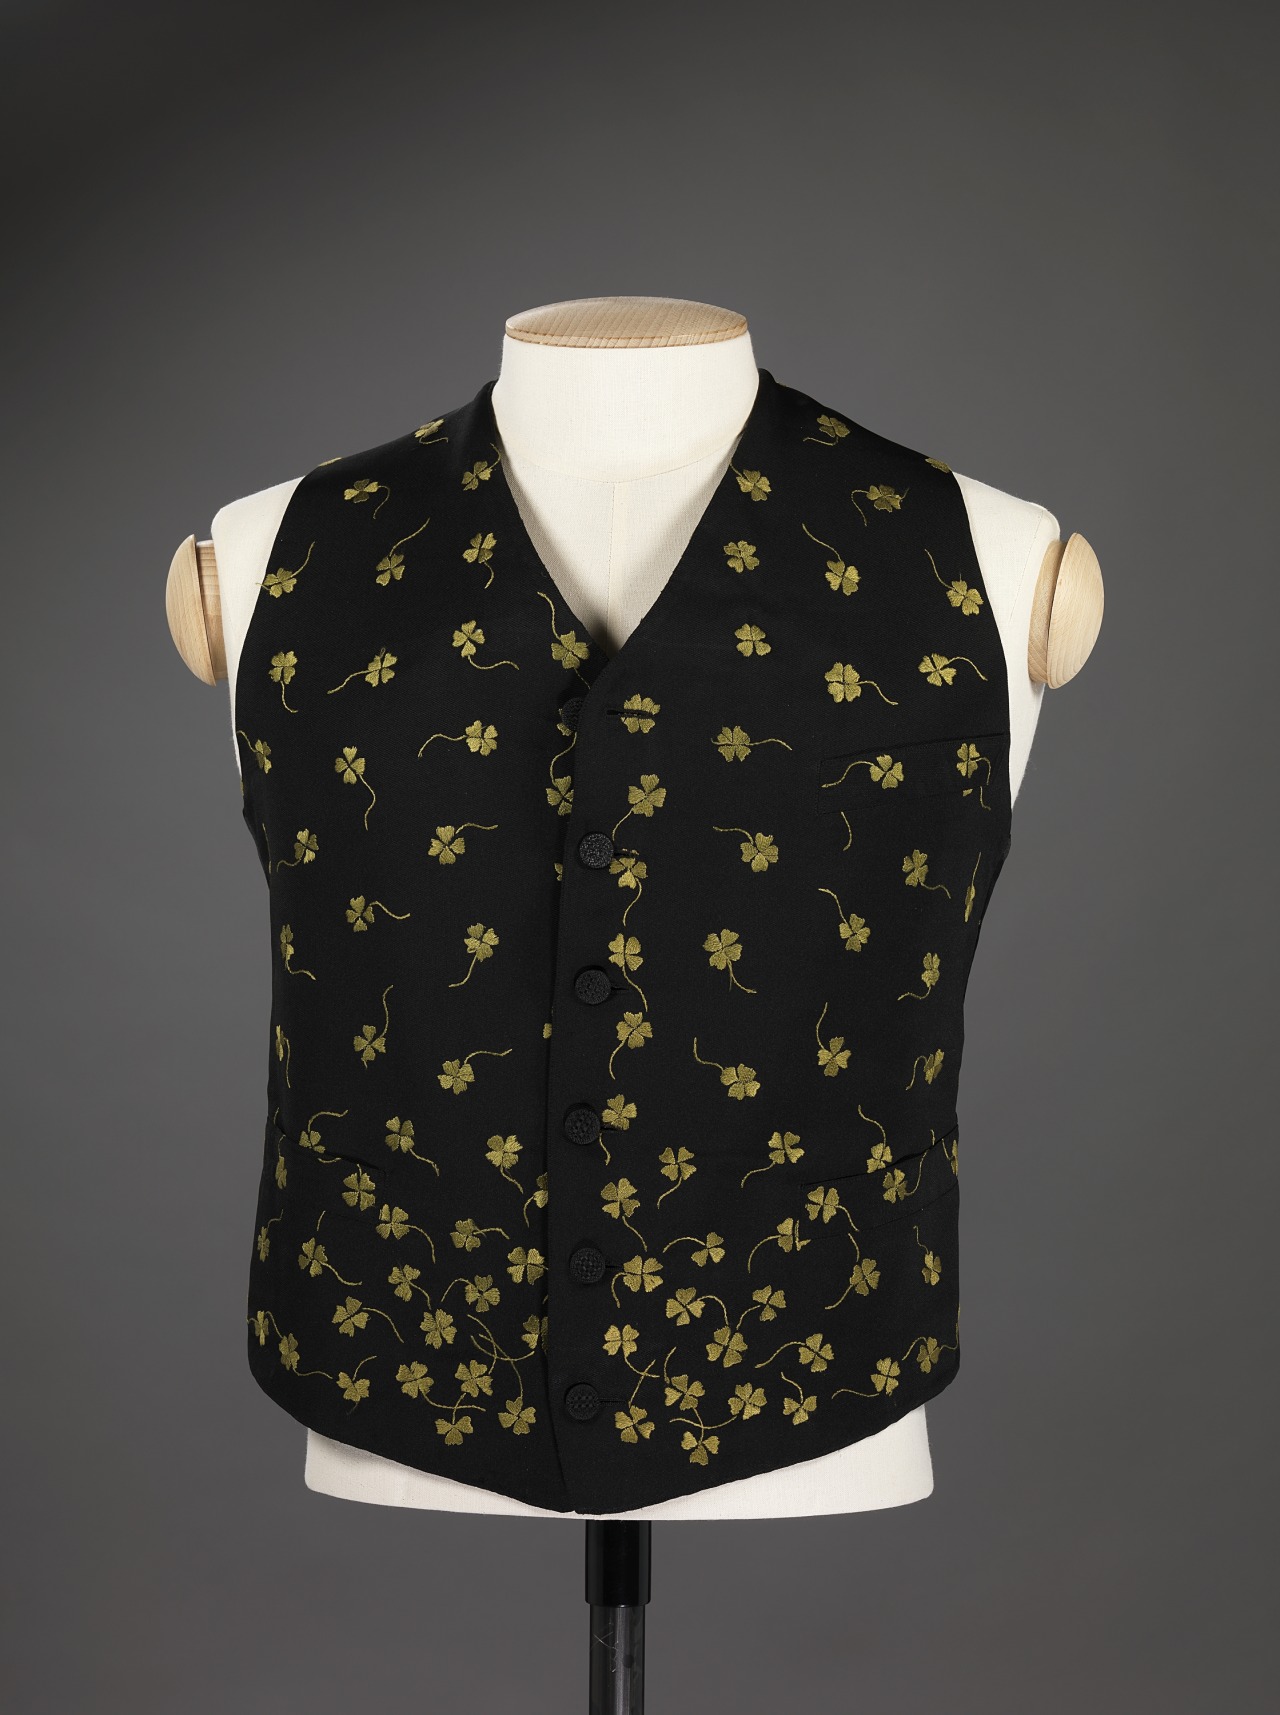 19th Century Blog | aneacostumes: Patterned male waistcoats from the...